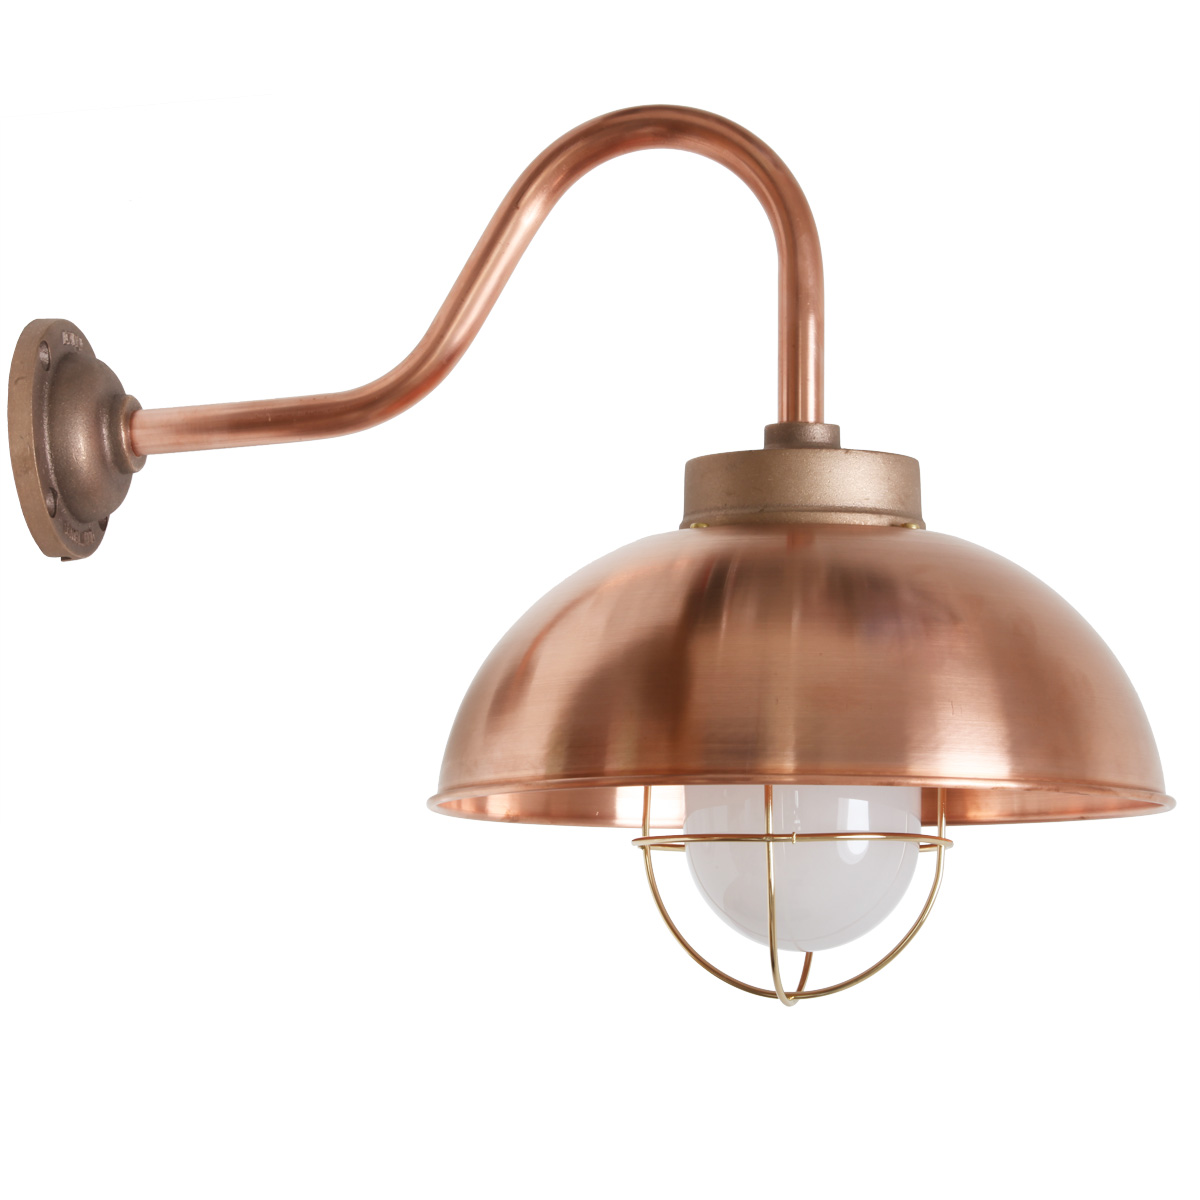 Shipyard Wall Light in Copper or Iron